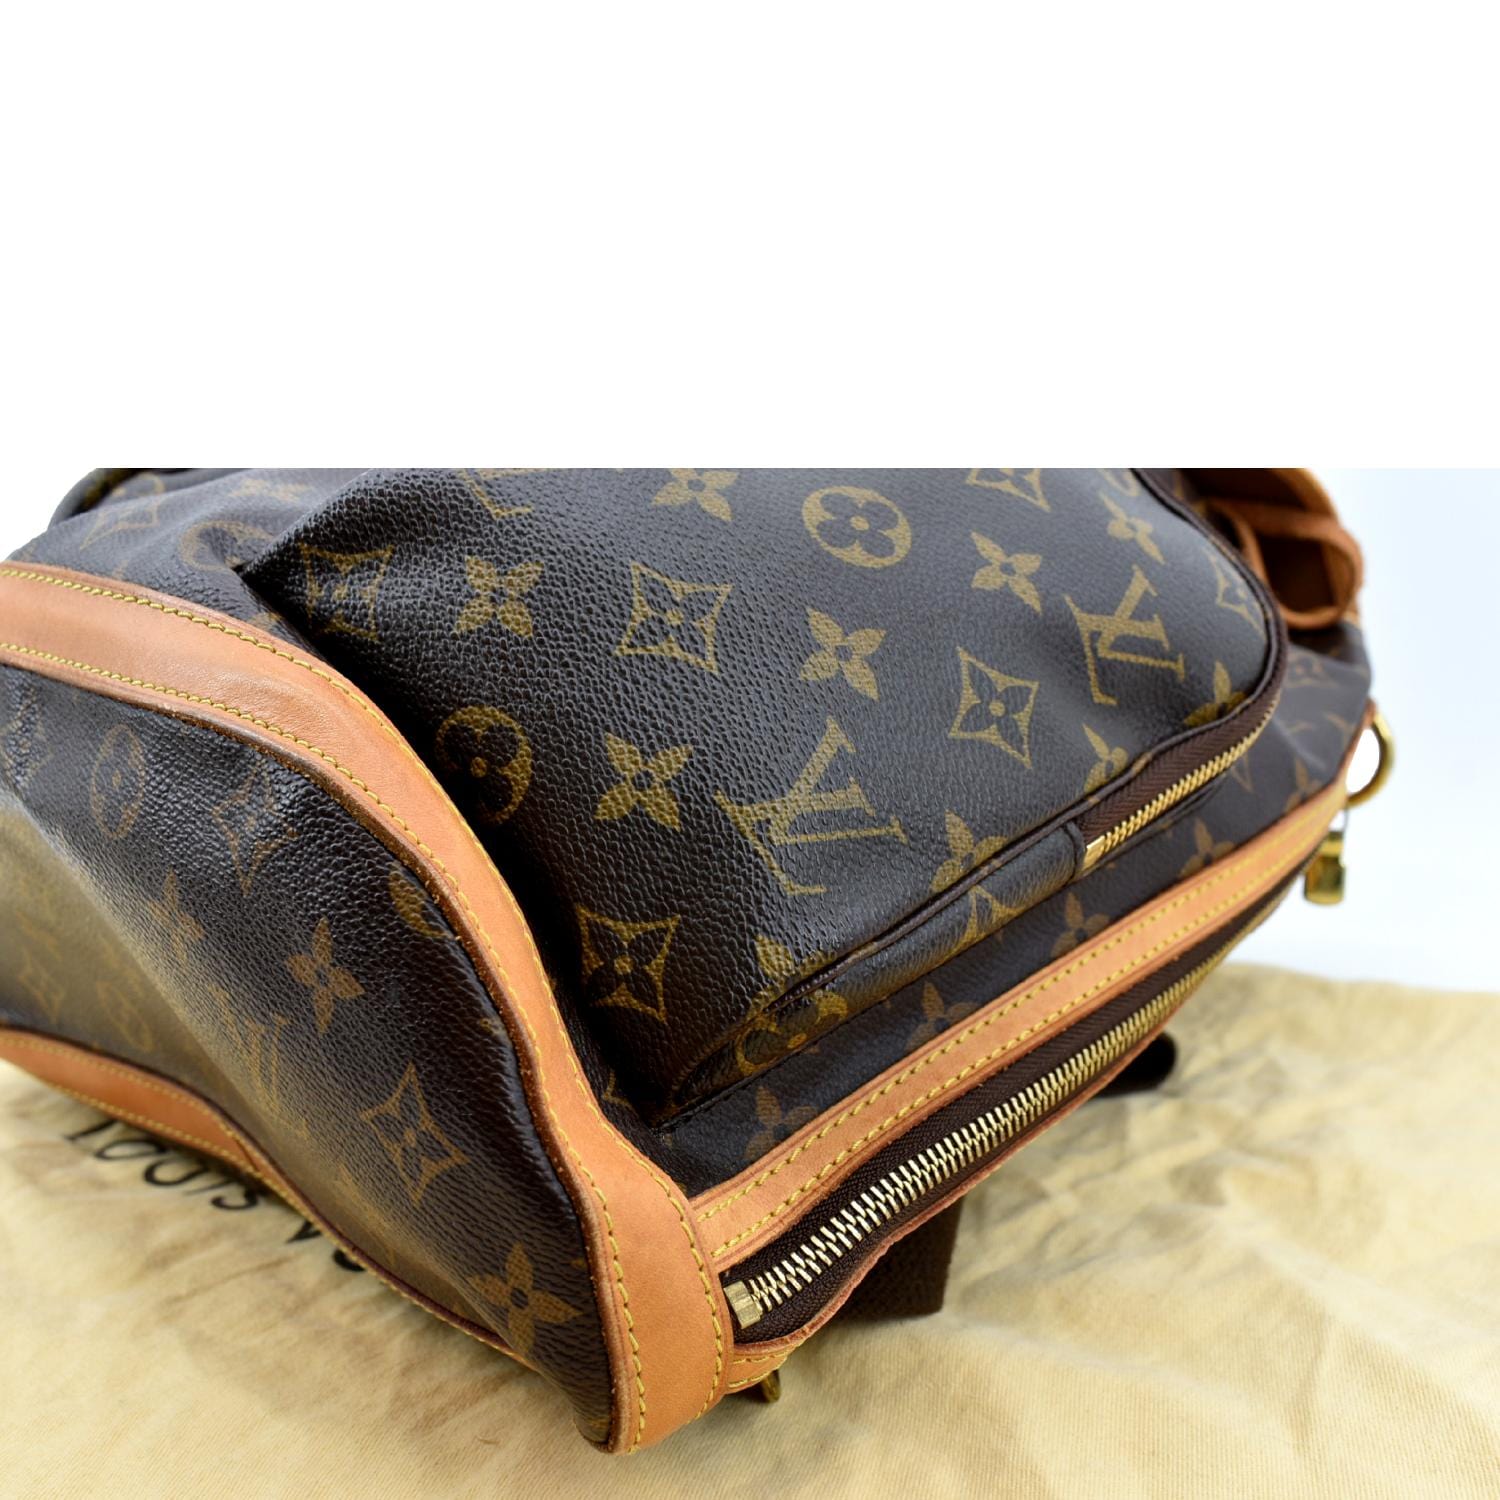 Water Stain On My New Lv Bag :( Help Please! : Louisvuitton